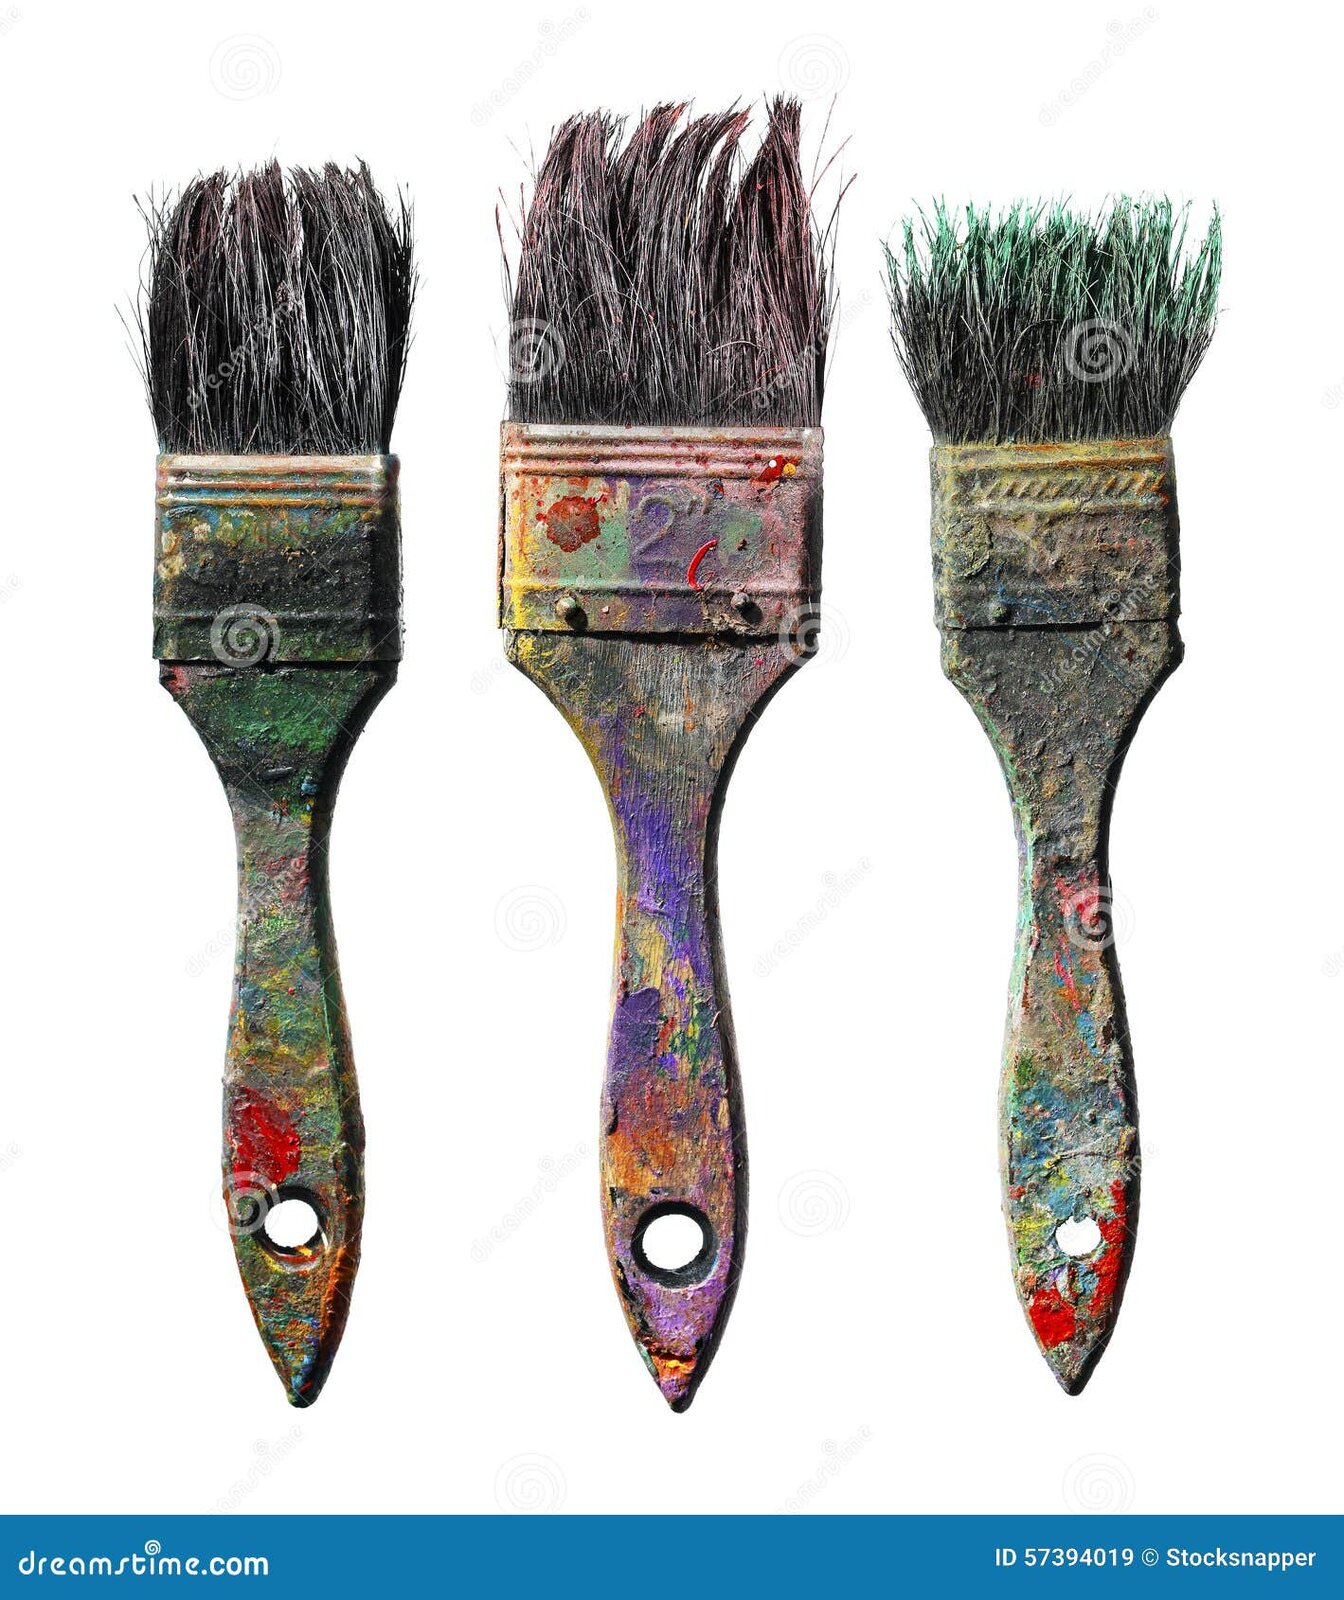 ols-brushes-old-dirty-paint-isolated-white-57394019.jpg